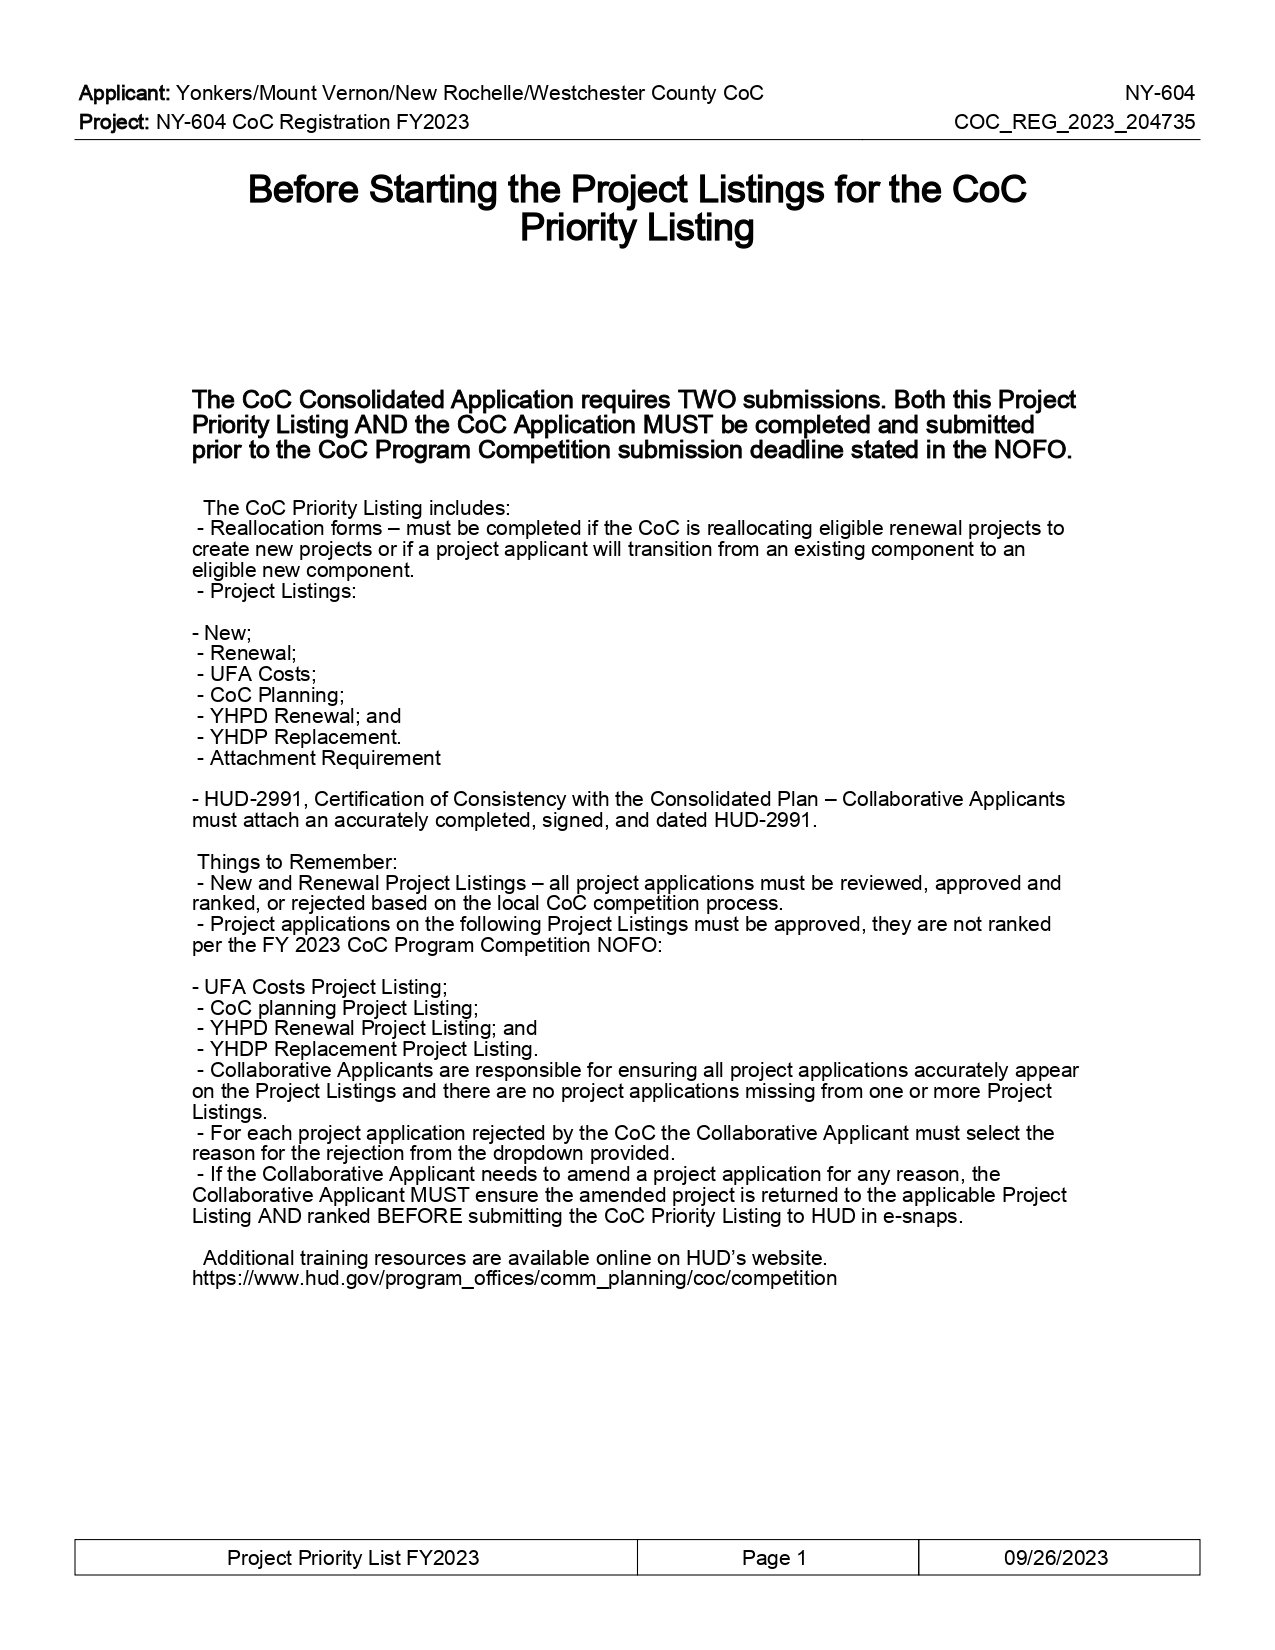 NY-604 FY2022 Priority Listing-1_page-0001.jpg